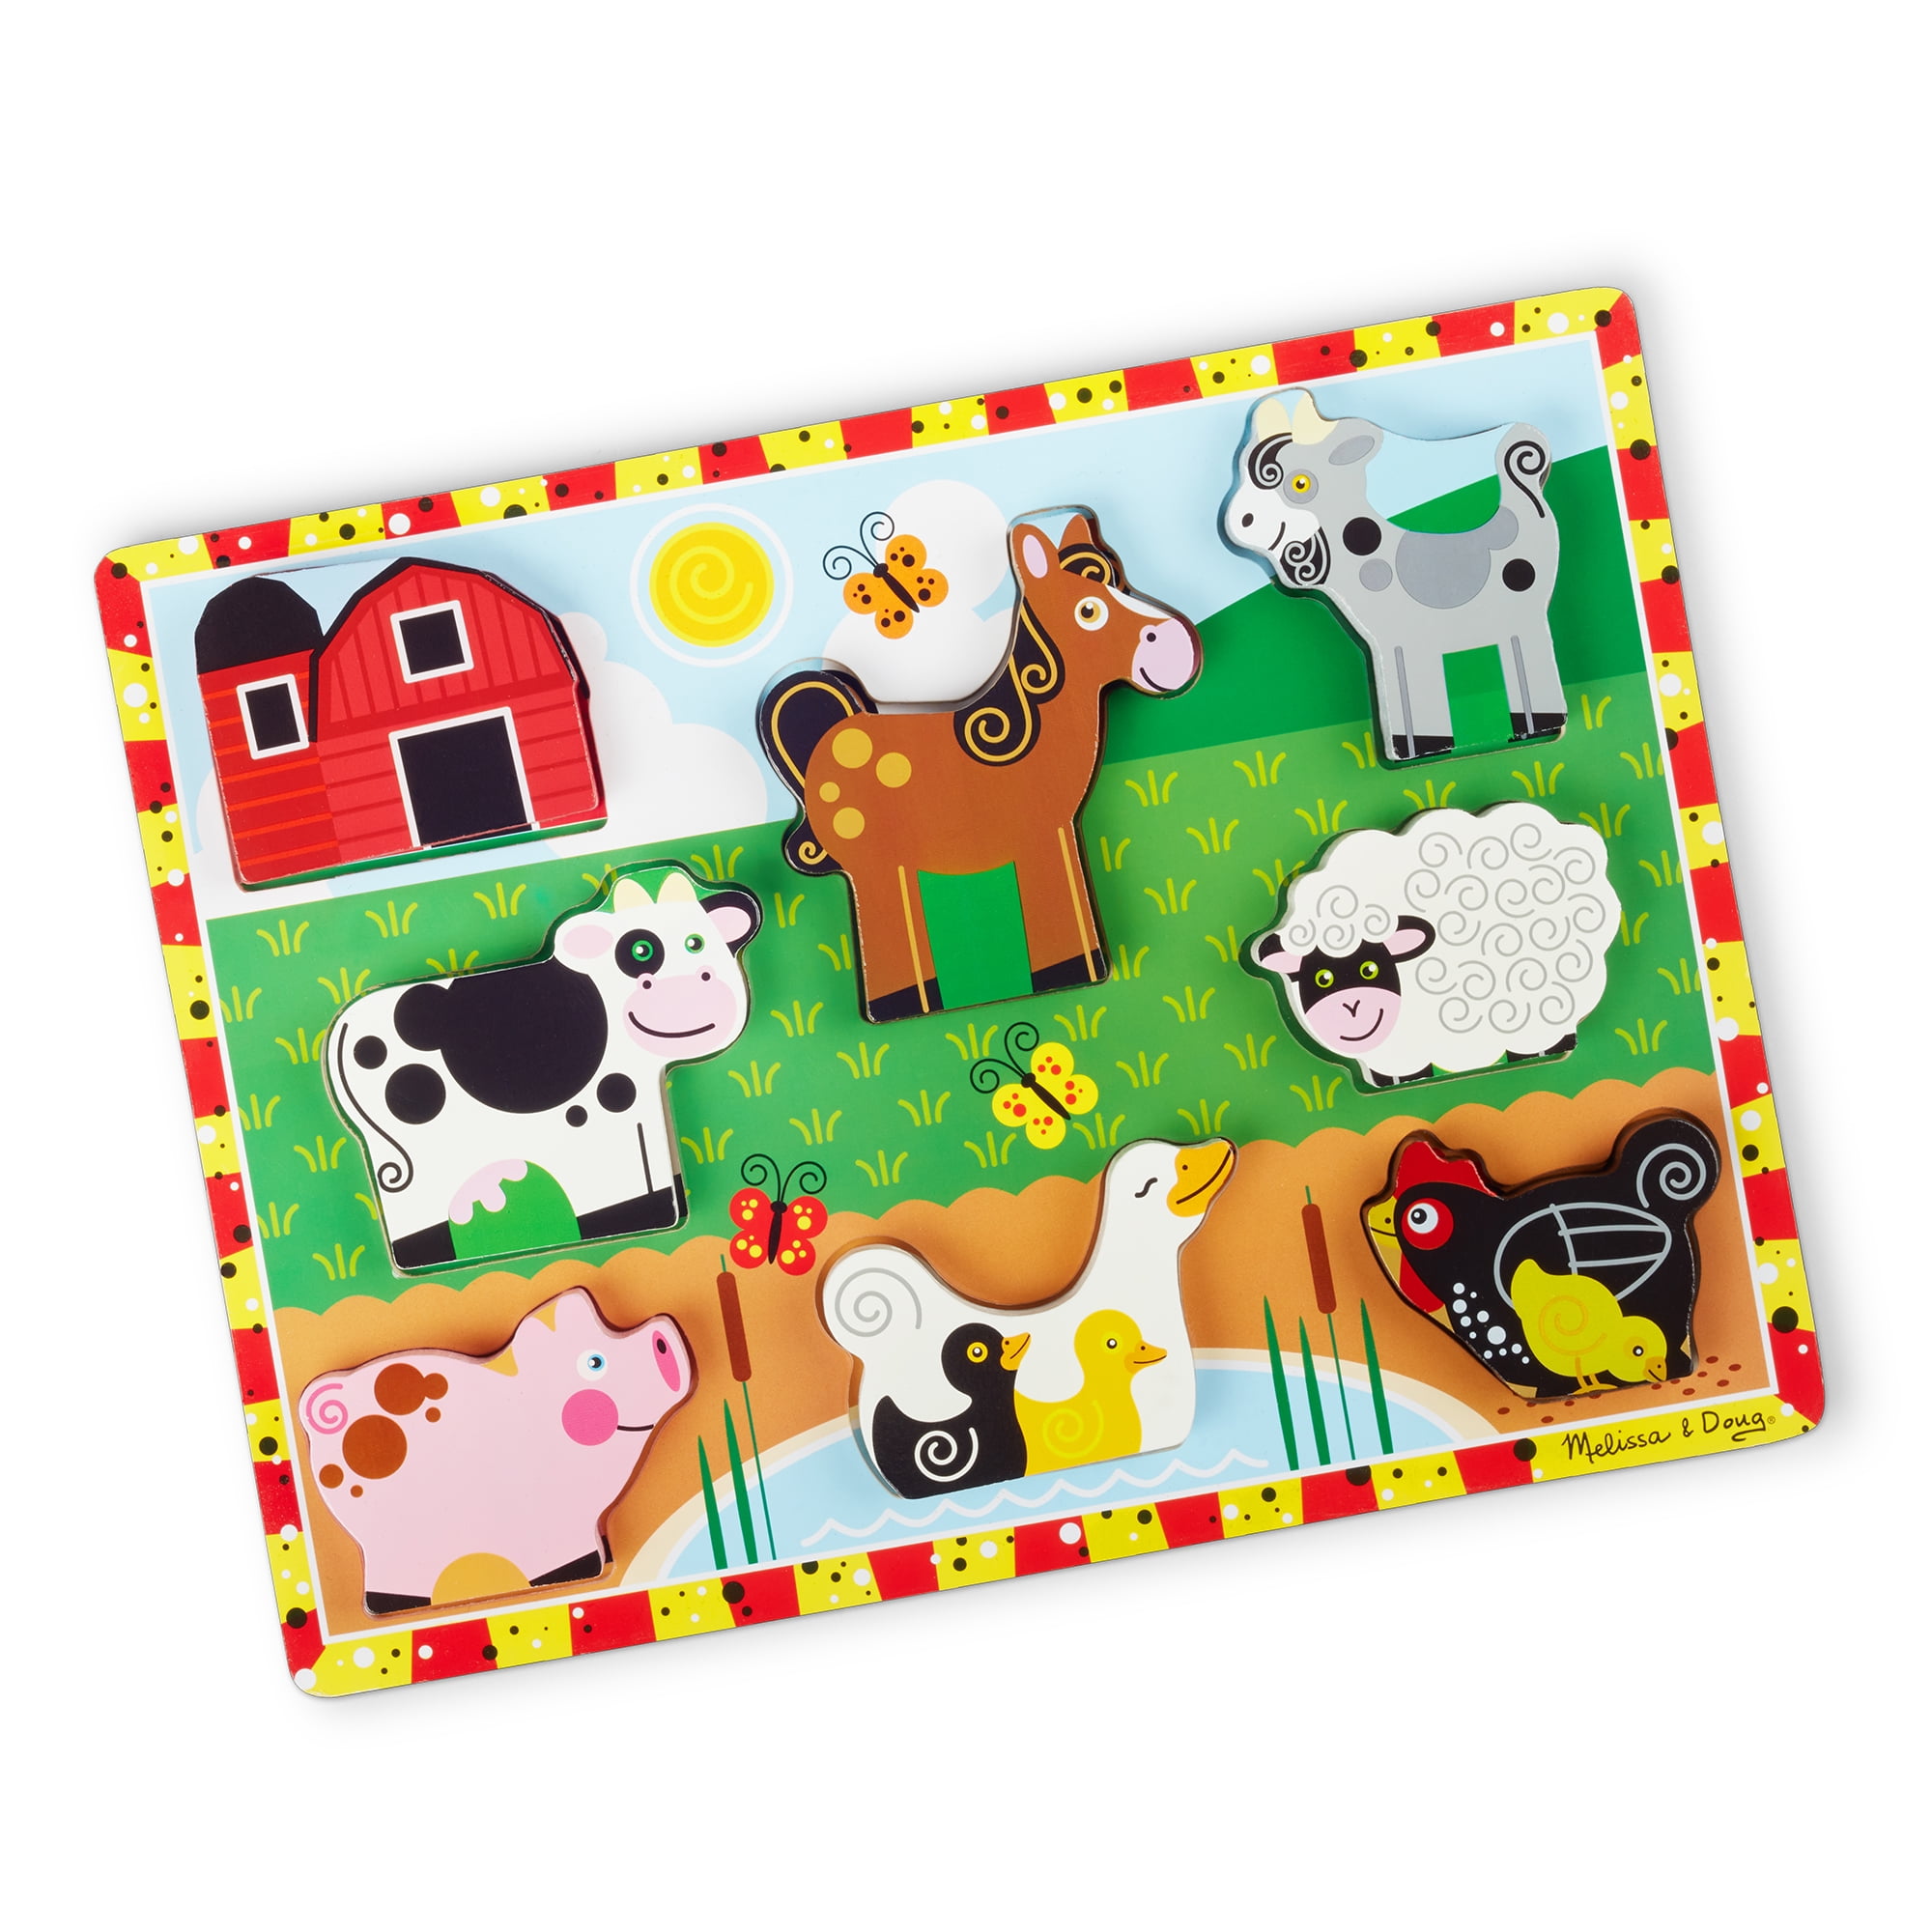 Melissa & Doug Lci3731 Tools Chunky Puzzle for sale online 